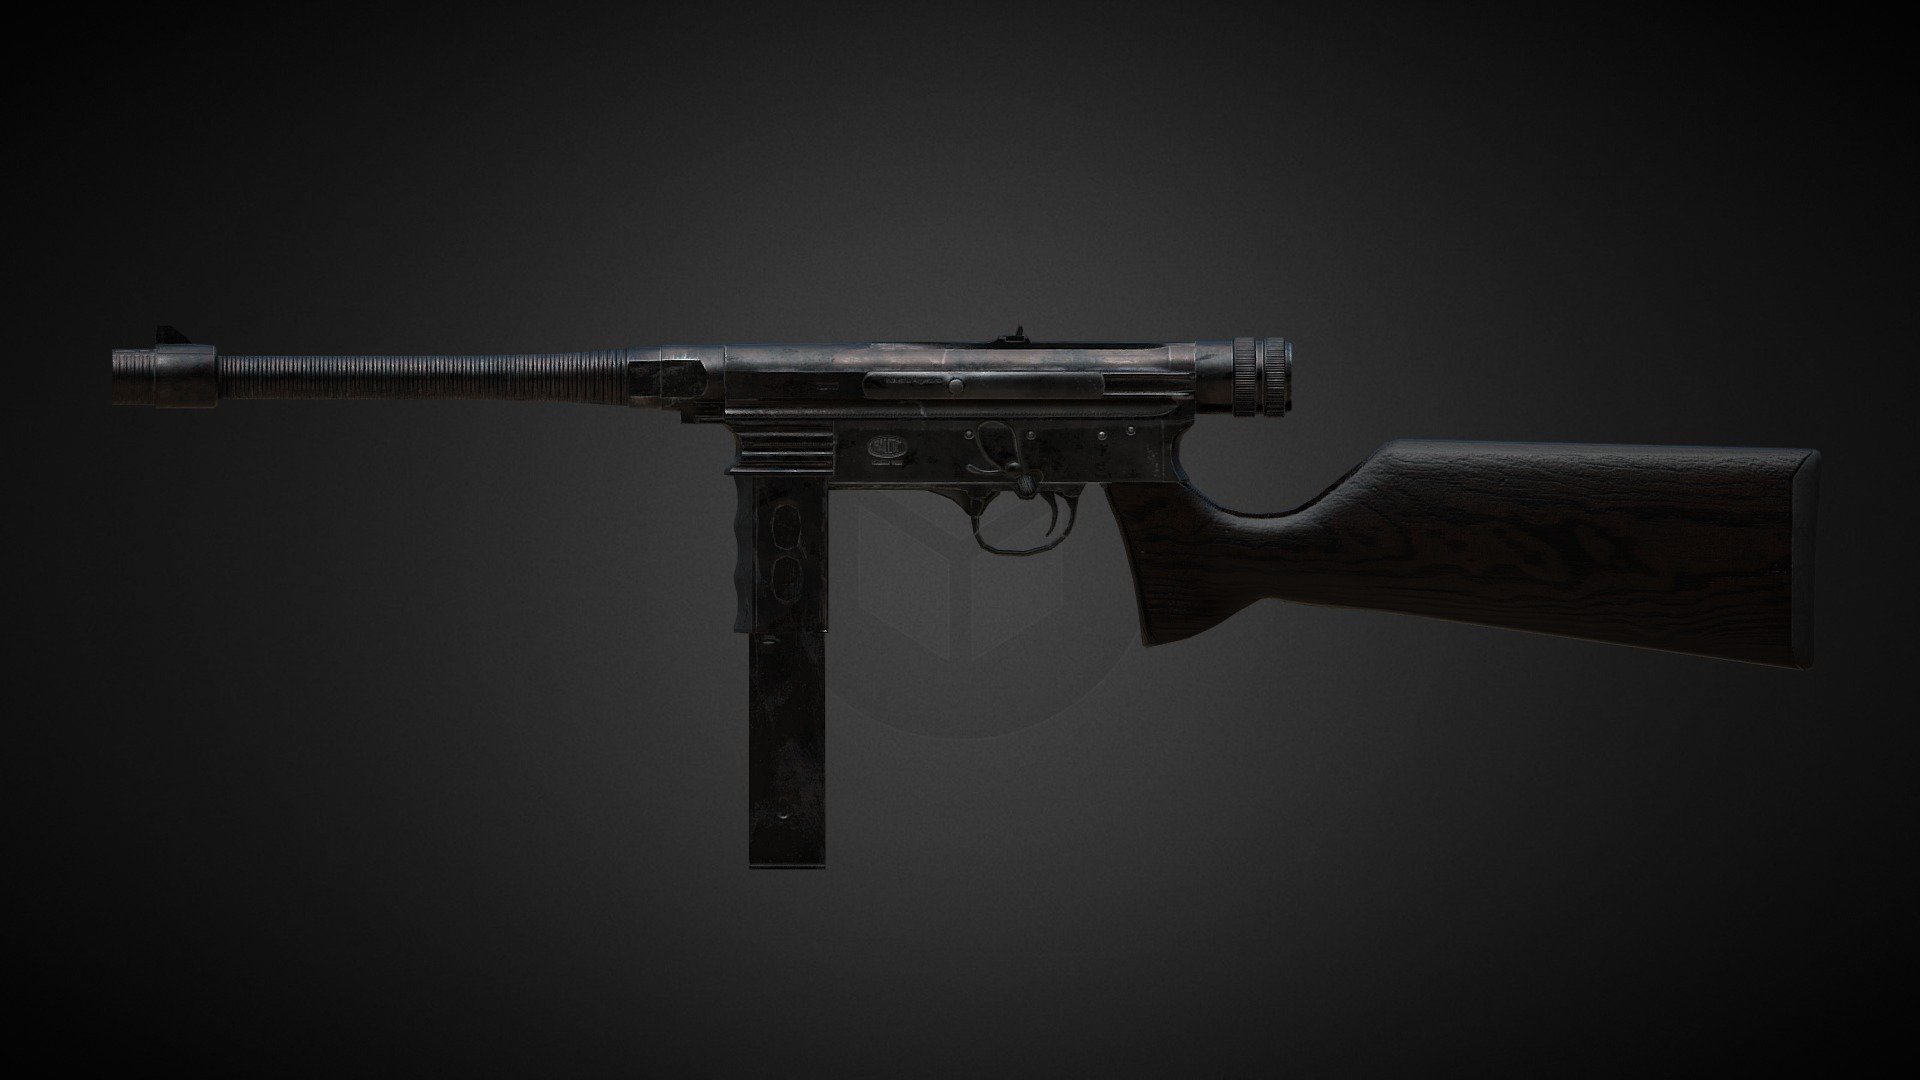 Argentine Submachine gun that i've made using Blender and Quixel Mixer.

Quite rare weapon made in the 40's. Textures are 4K - Halcon M1943 Submachine gun - 3D model by Rio Bruto (@Juan.Pablo.Coppa) 3d model